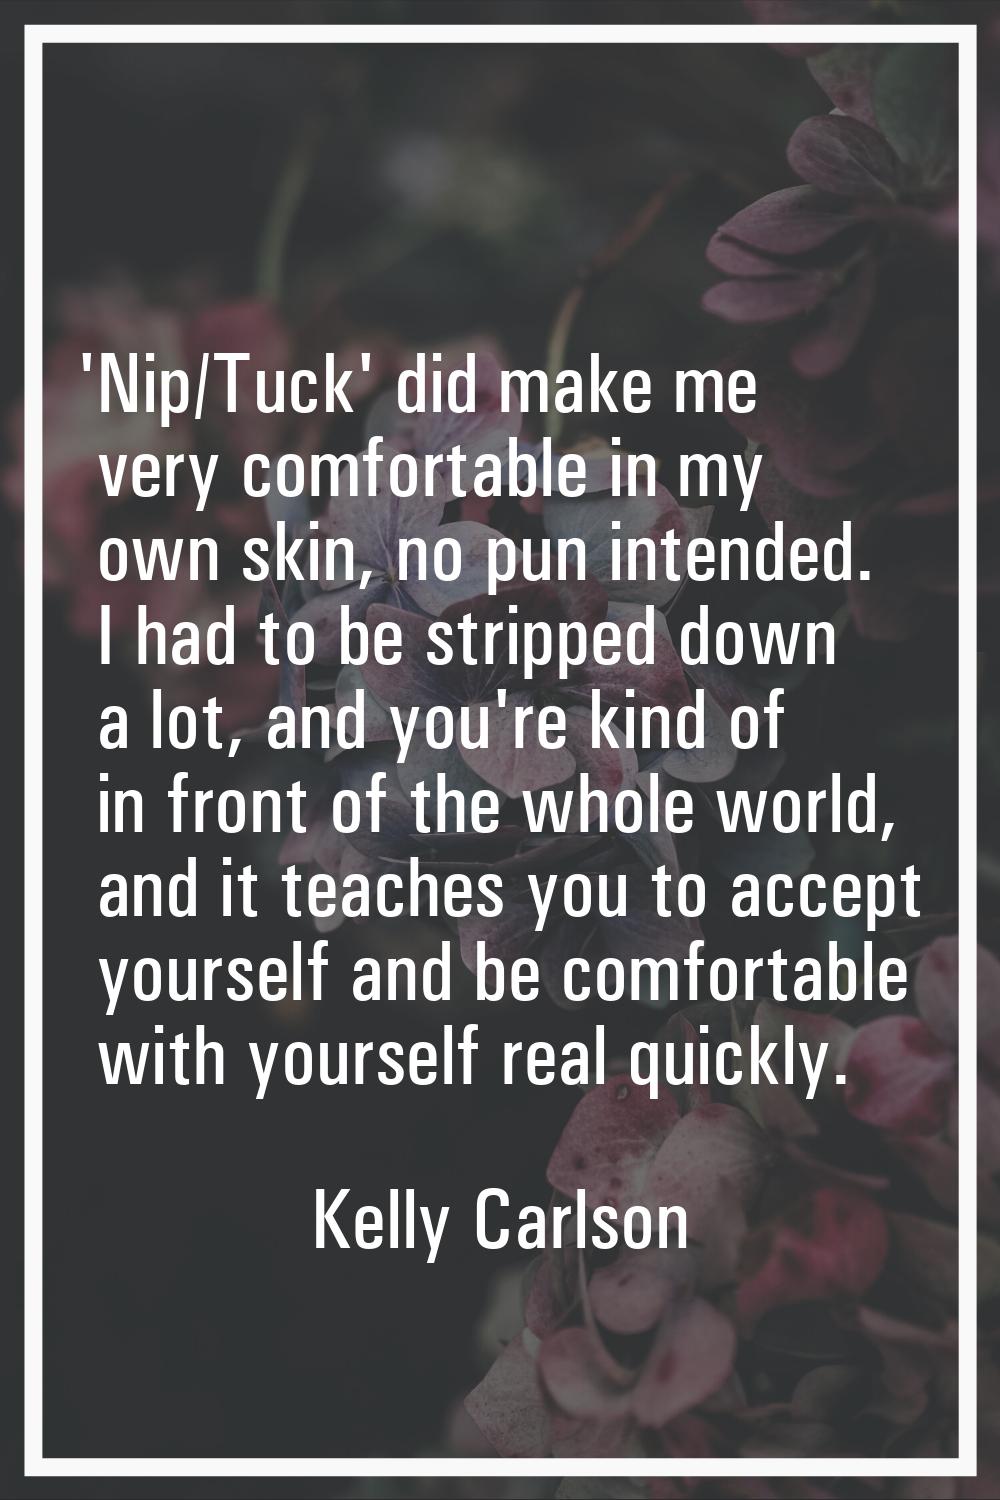 'Nip/Tuck' did make me very comfortable in my own skin, no pun intended. I had to be stripped down 